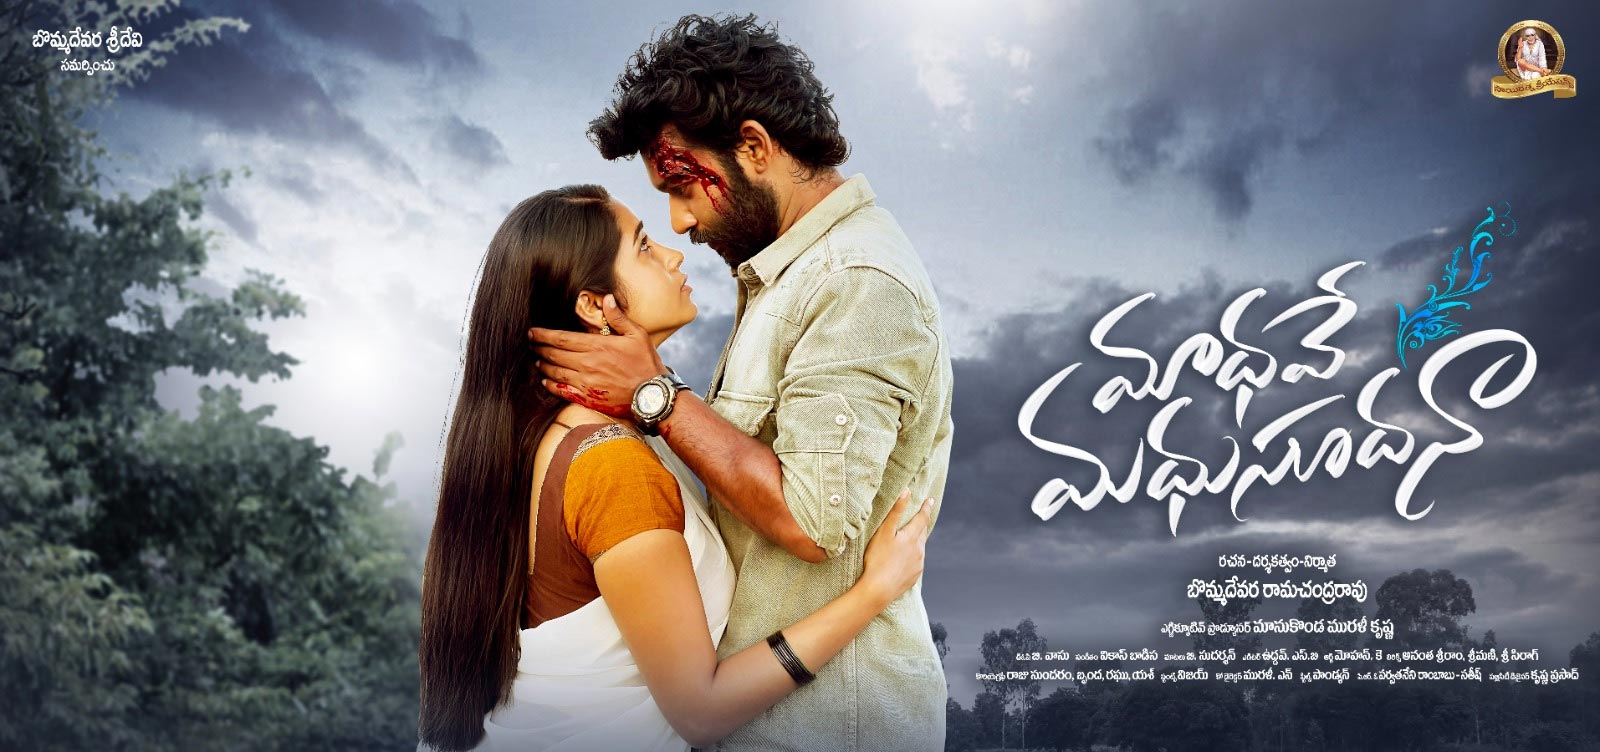 Motion Poster Of Madhave Madhusudana Is Released By Nagarjuna